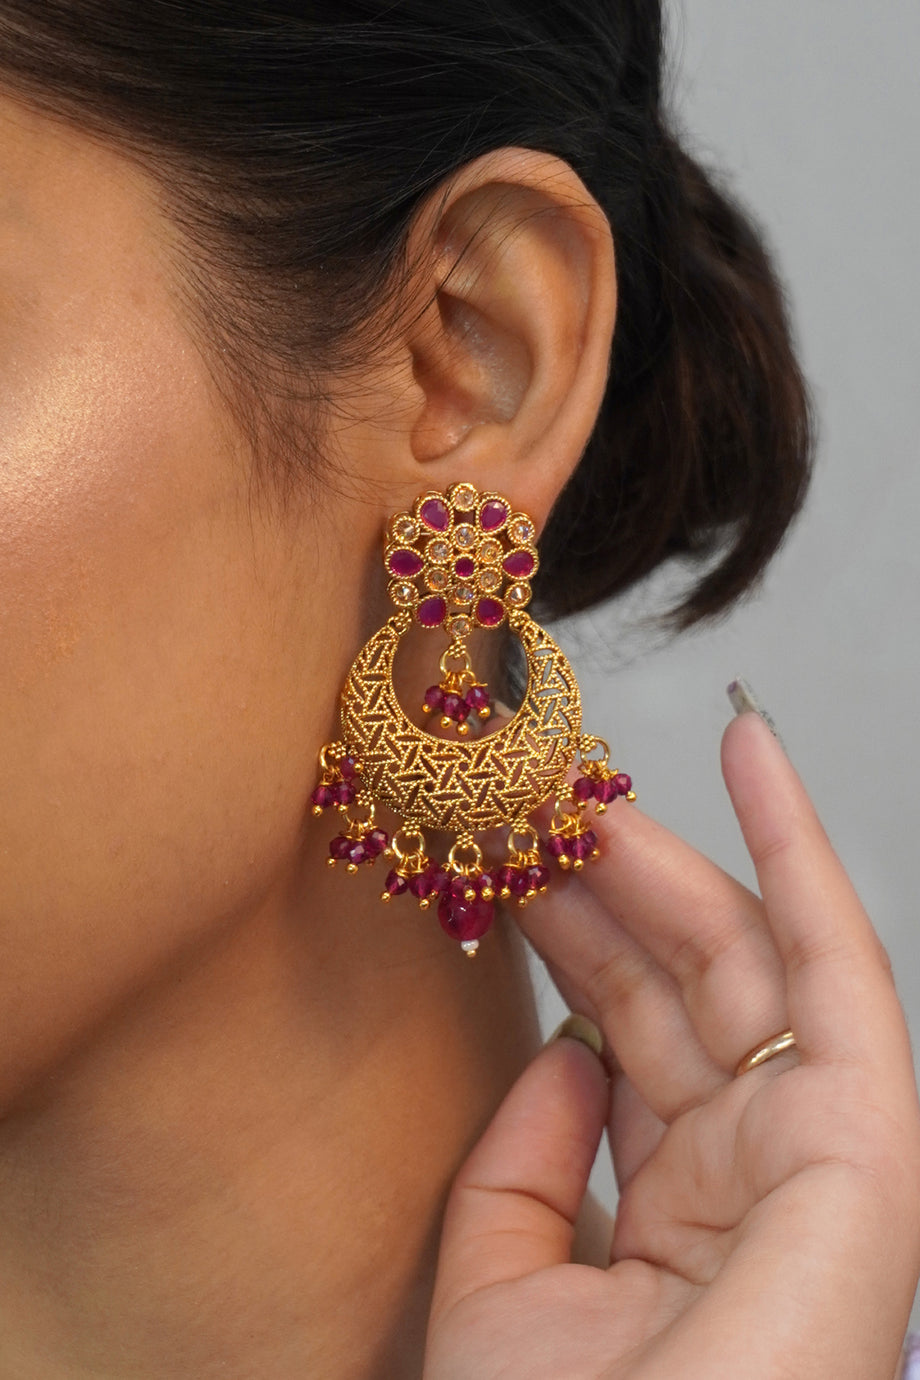 21 Best Wedding Earring Designs For Brides! • South India Jewels | Temple  jewellery earrings, Gold jewelry earrings, Gold jewelry simple